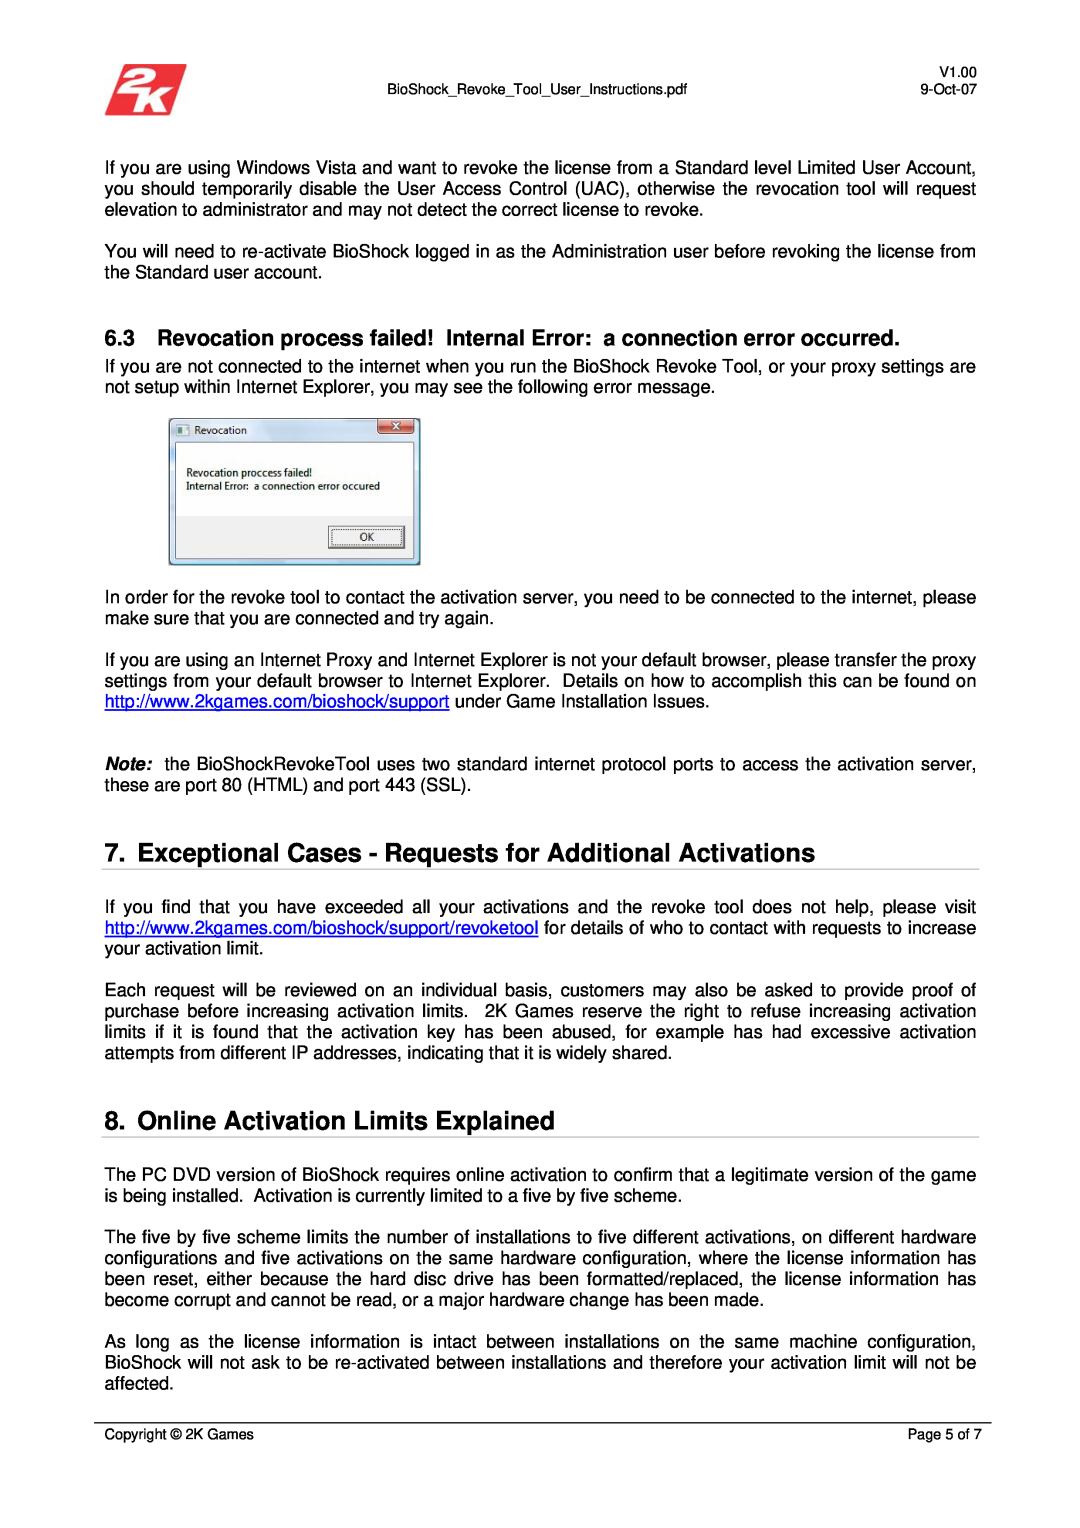 Toro V1.00 manual Exceptional Cases - Requests for Additional Activations, Online Activation Limits Explained, Page 5 of 